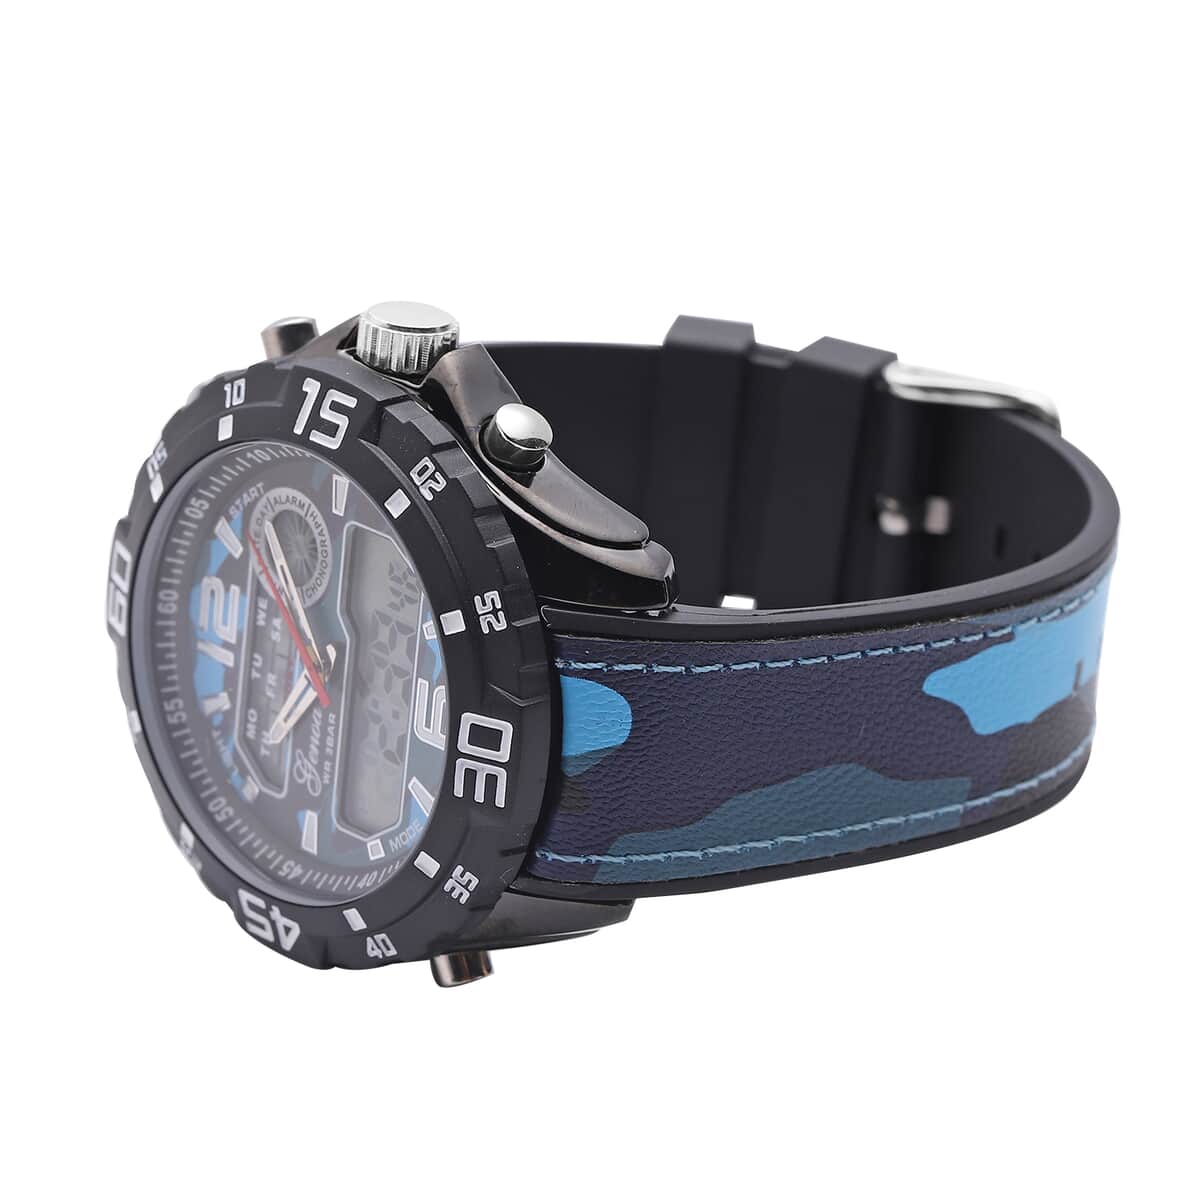 GENOA Japanese and Electronic Movement Multifunctional Key Watch with Camouflage Blue Faux Leather Strap image number 3